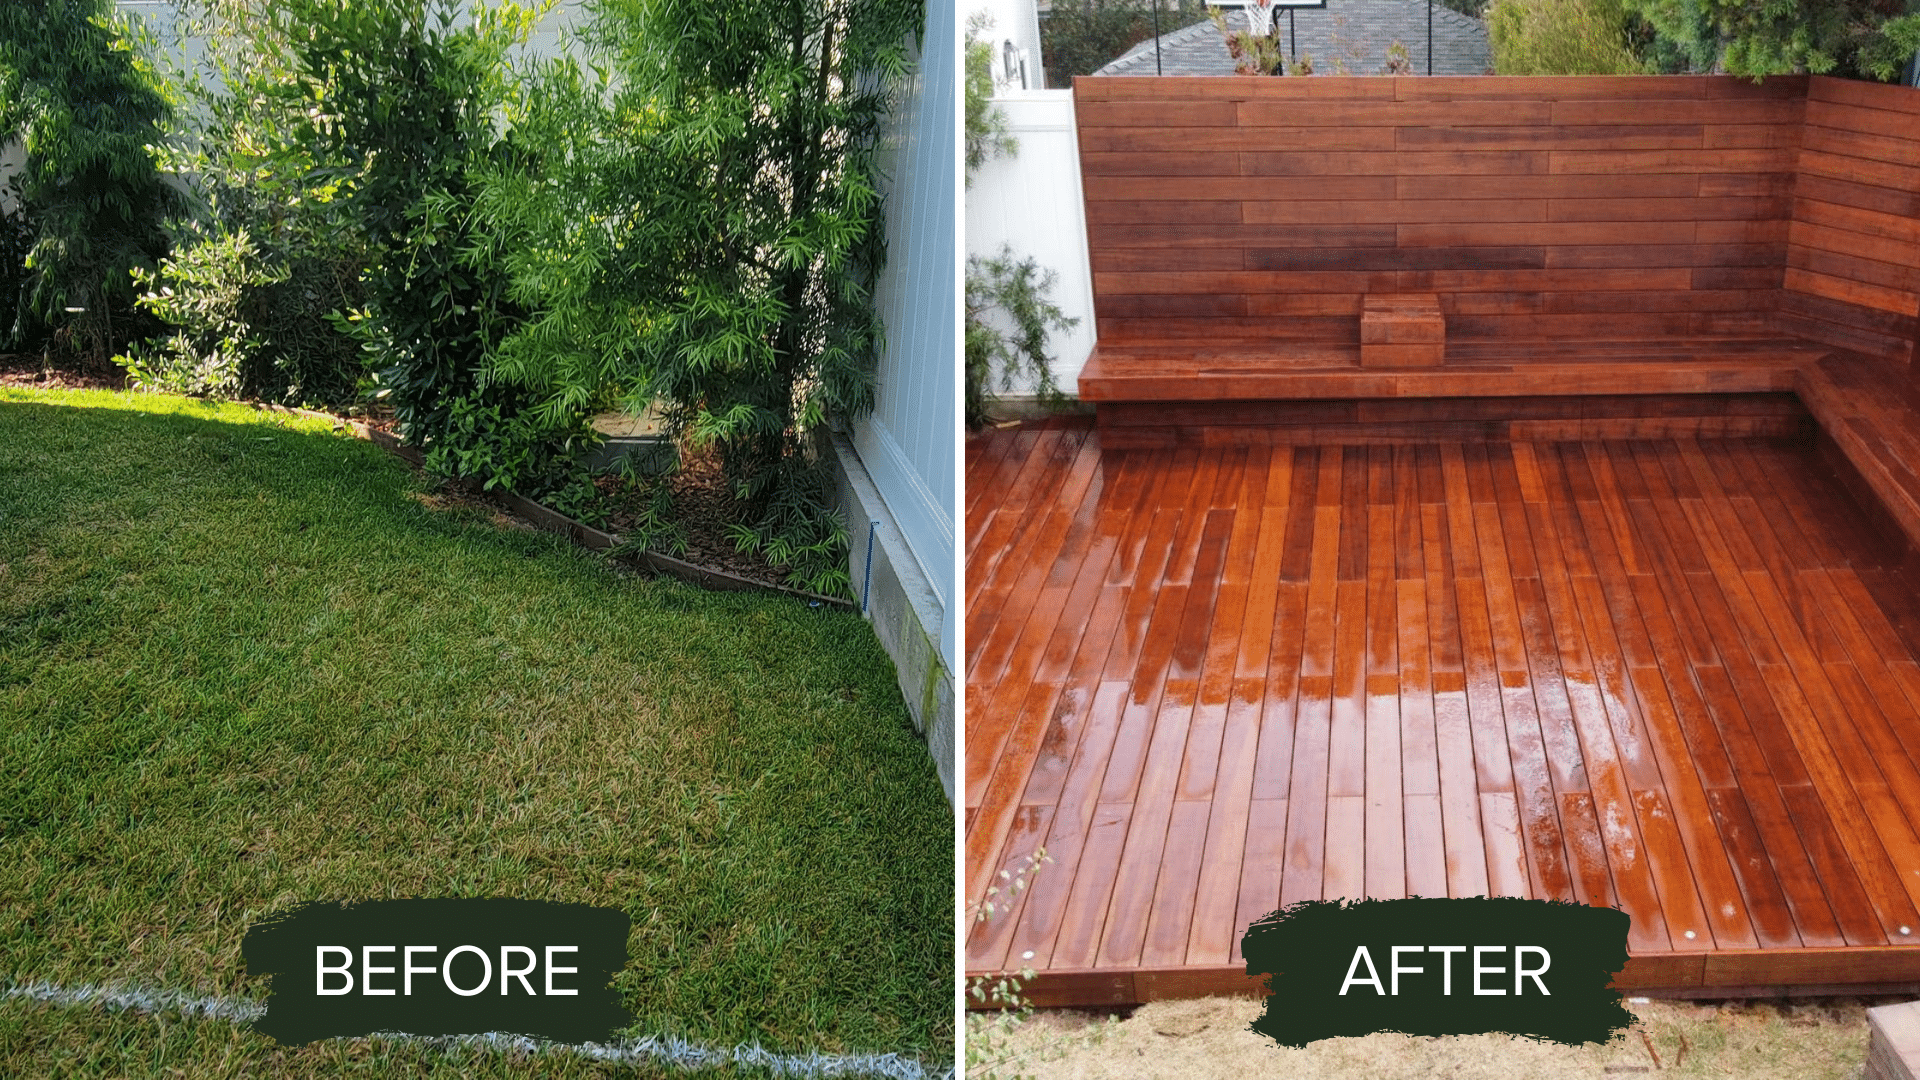 BEFORE AFTER DECK BUILDING